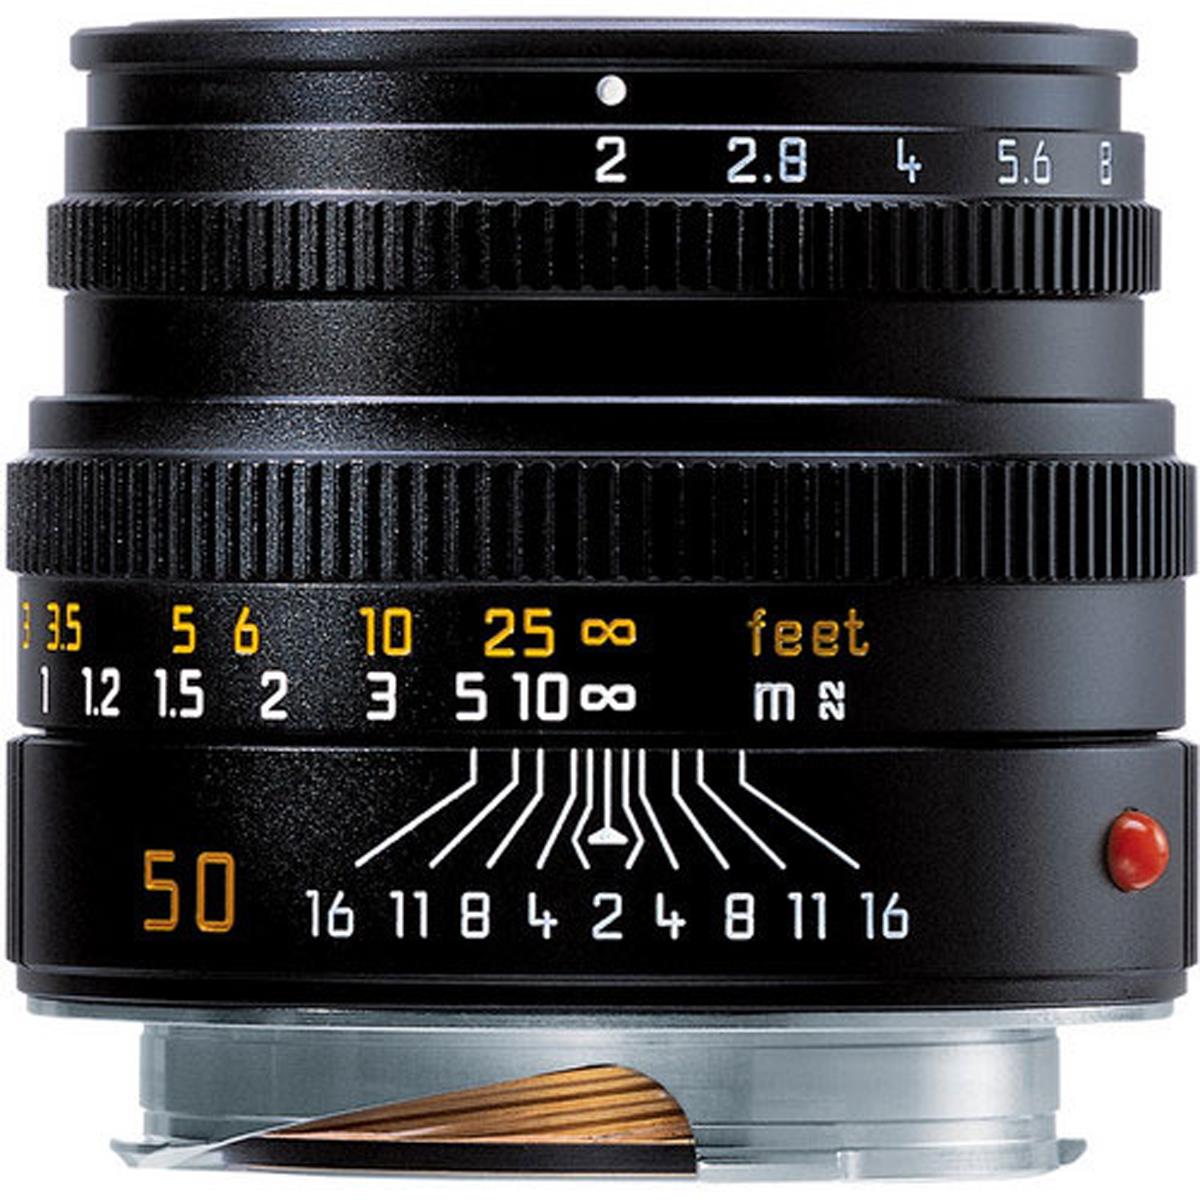 Image of Leica 50mm f/2 Summicron-M Lens for M System